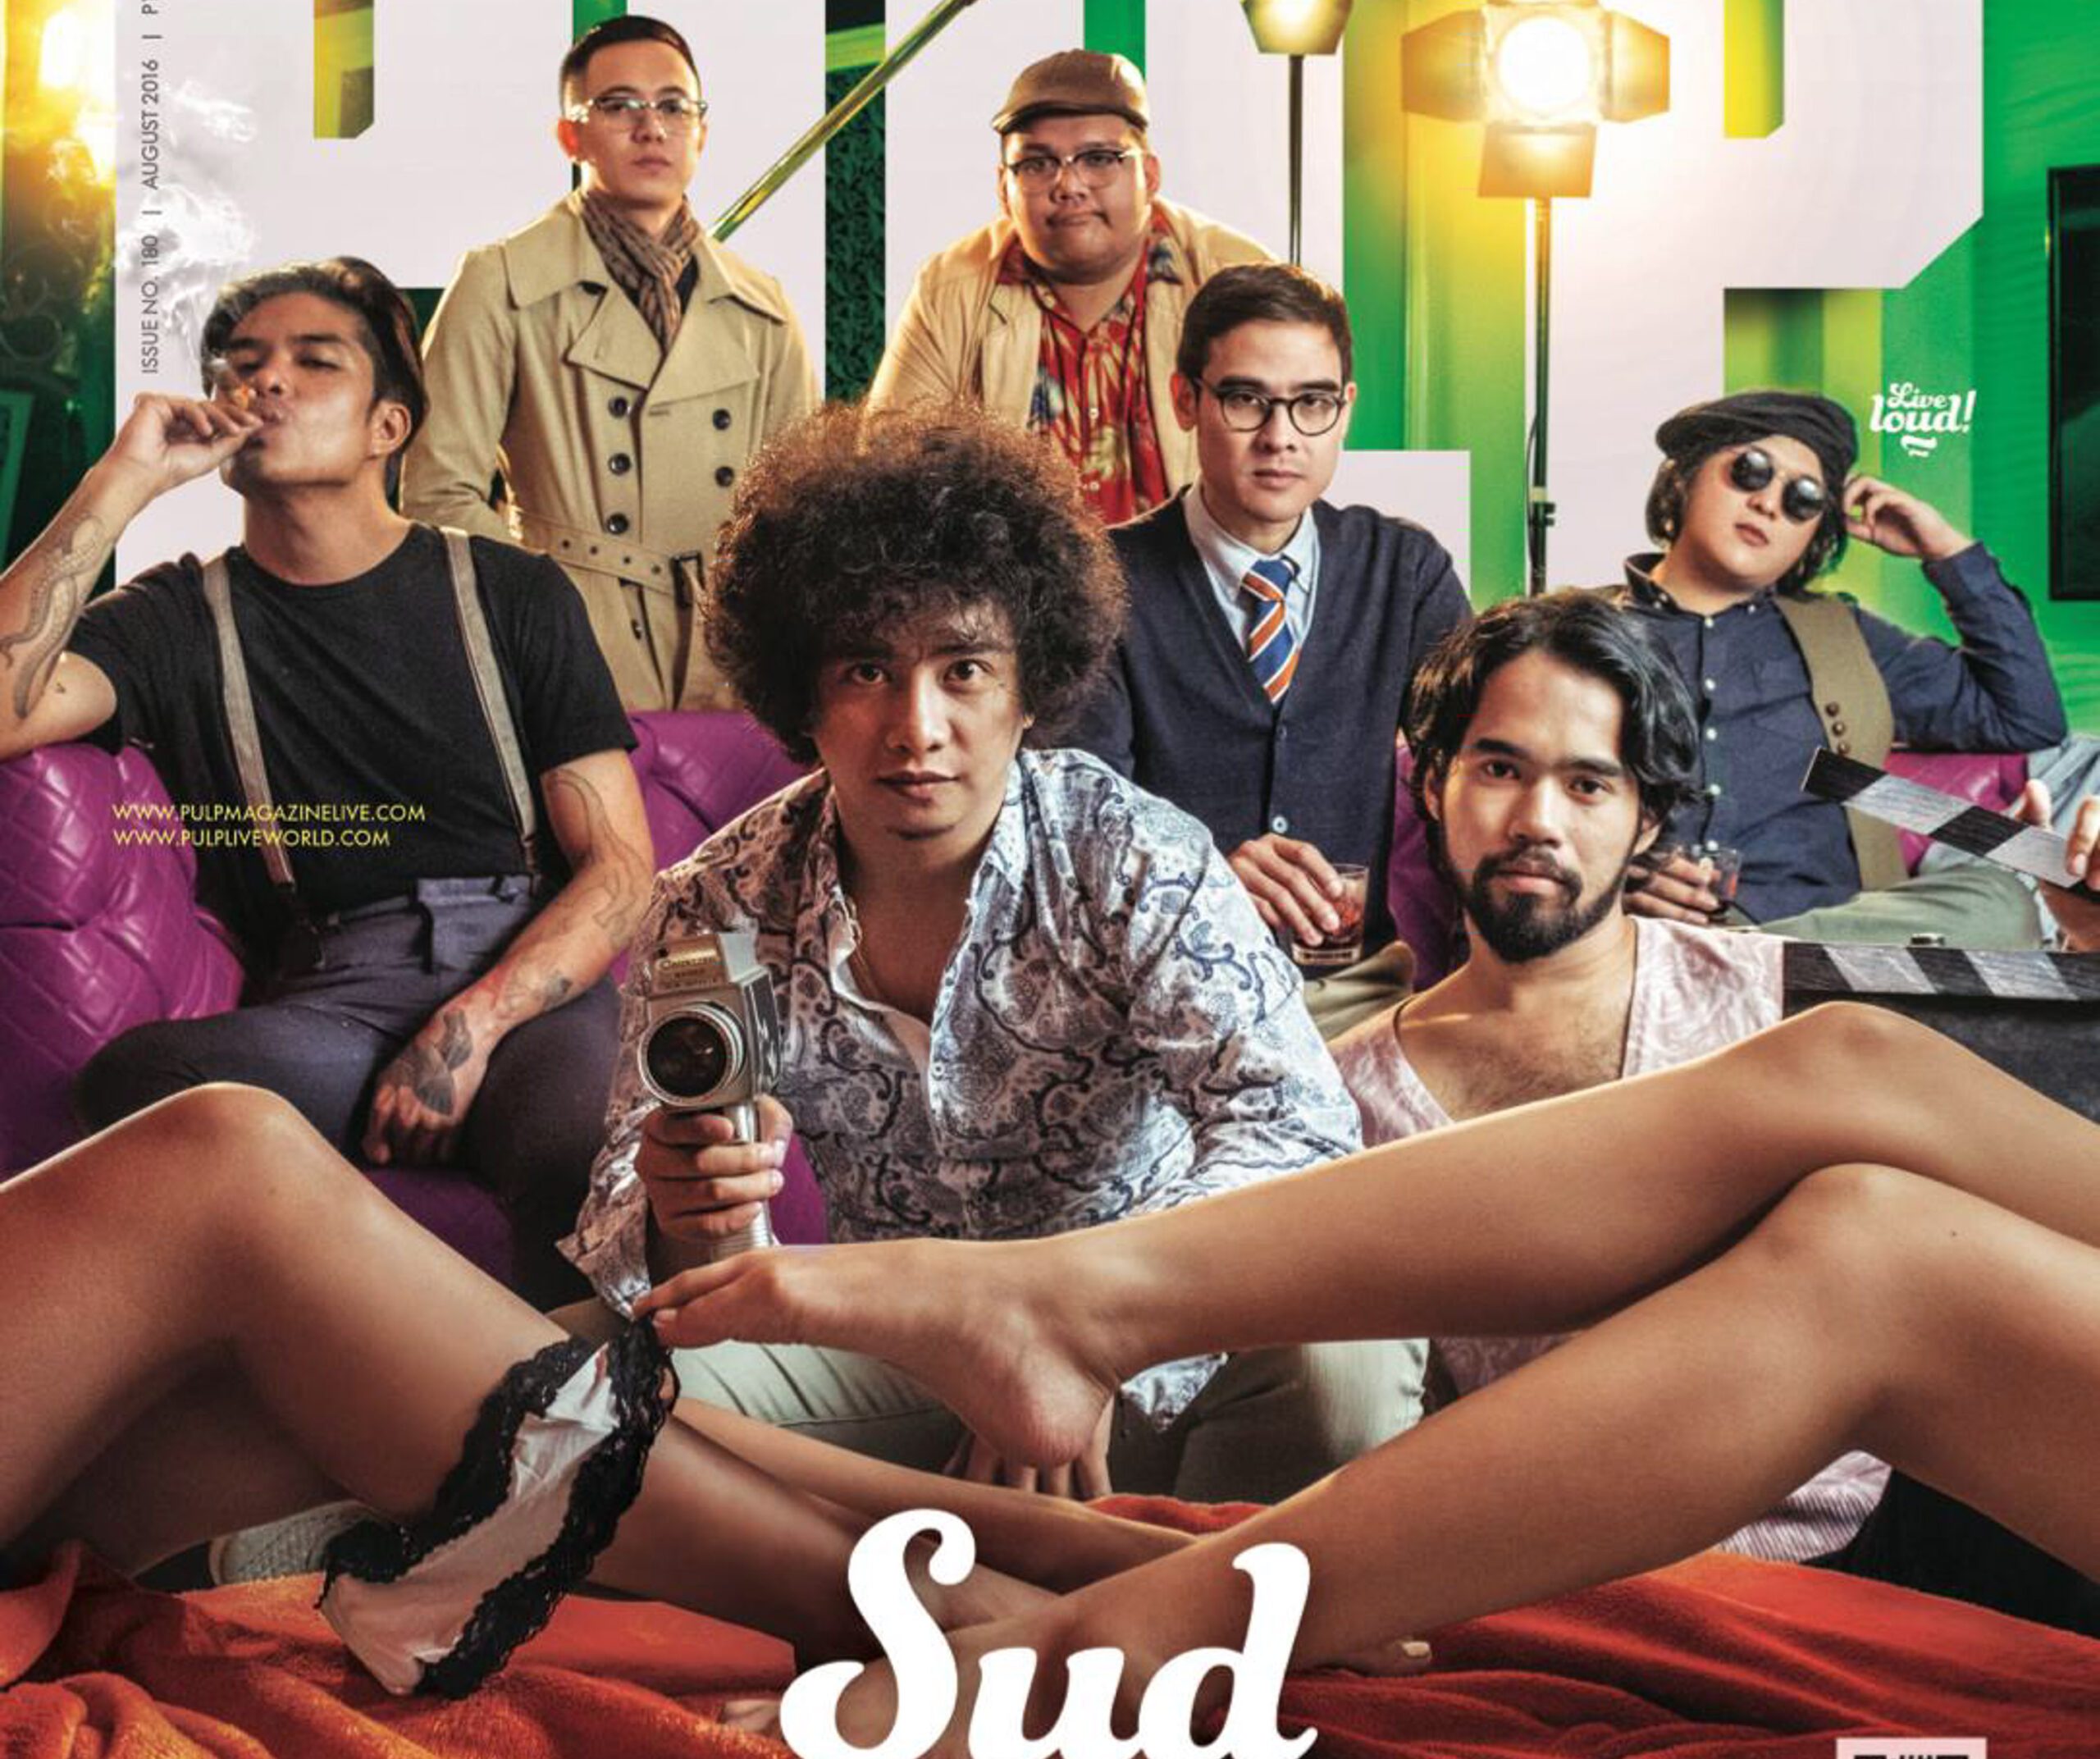 Controversial Pulp Magazine cover draws criticism, band members, publisher respond